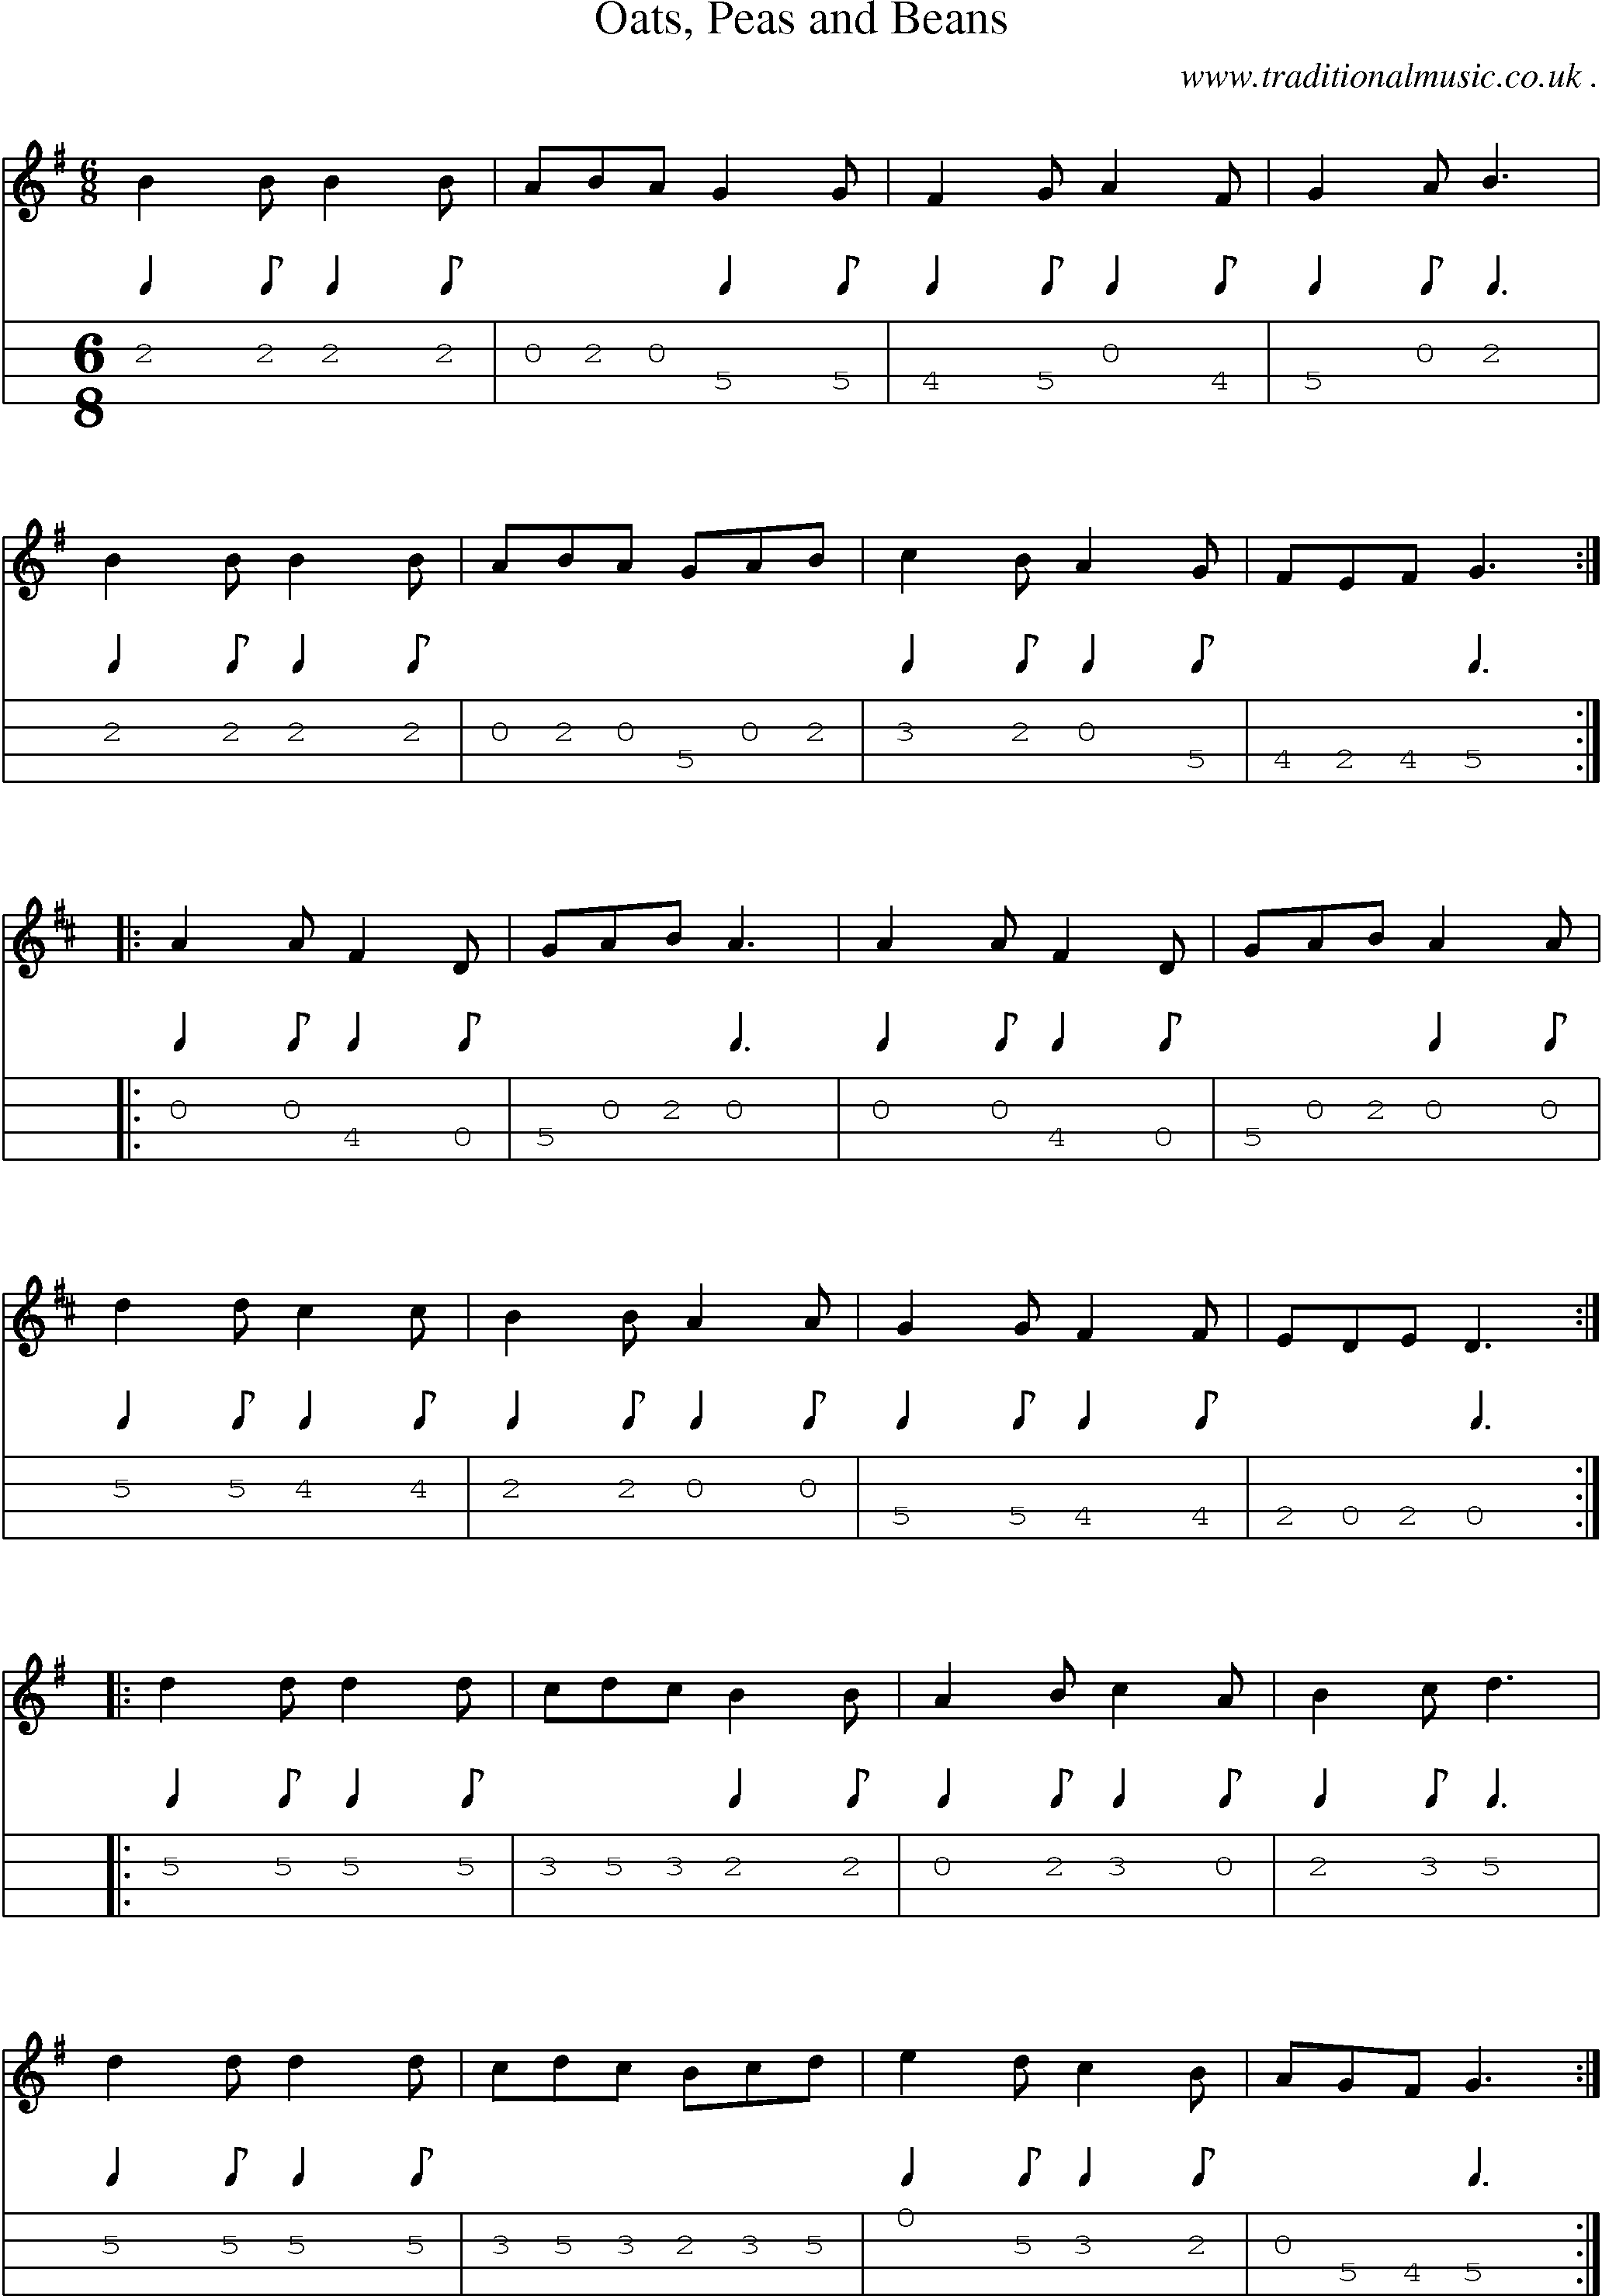 Sheet-Music and Mandolin Tabs for Oats Peas And Beans